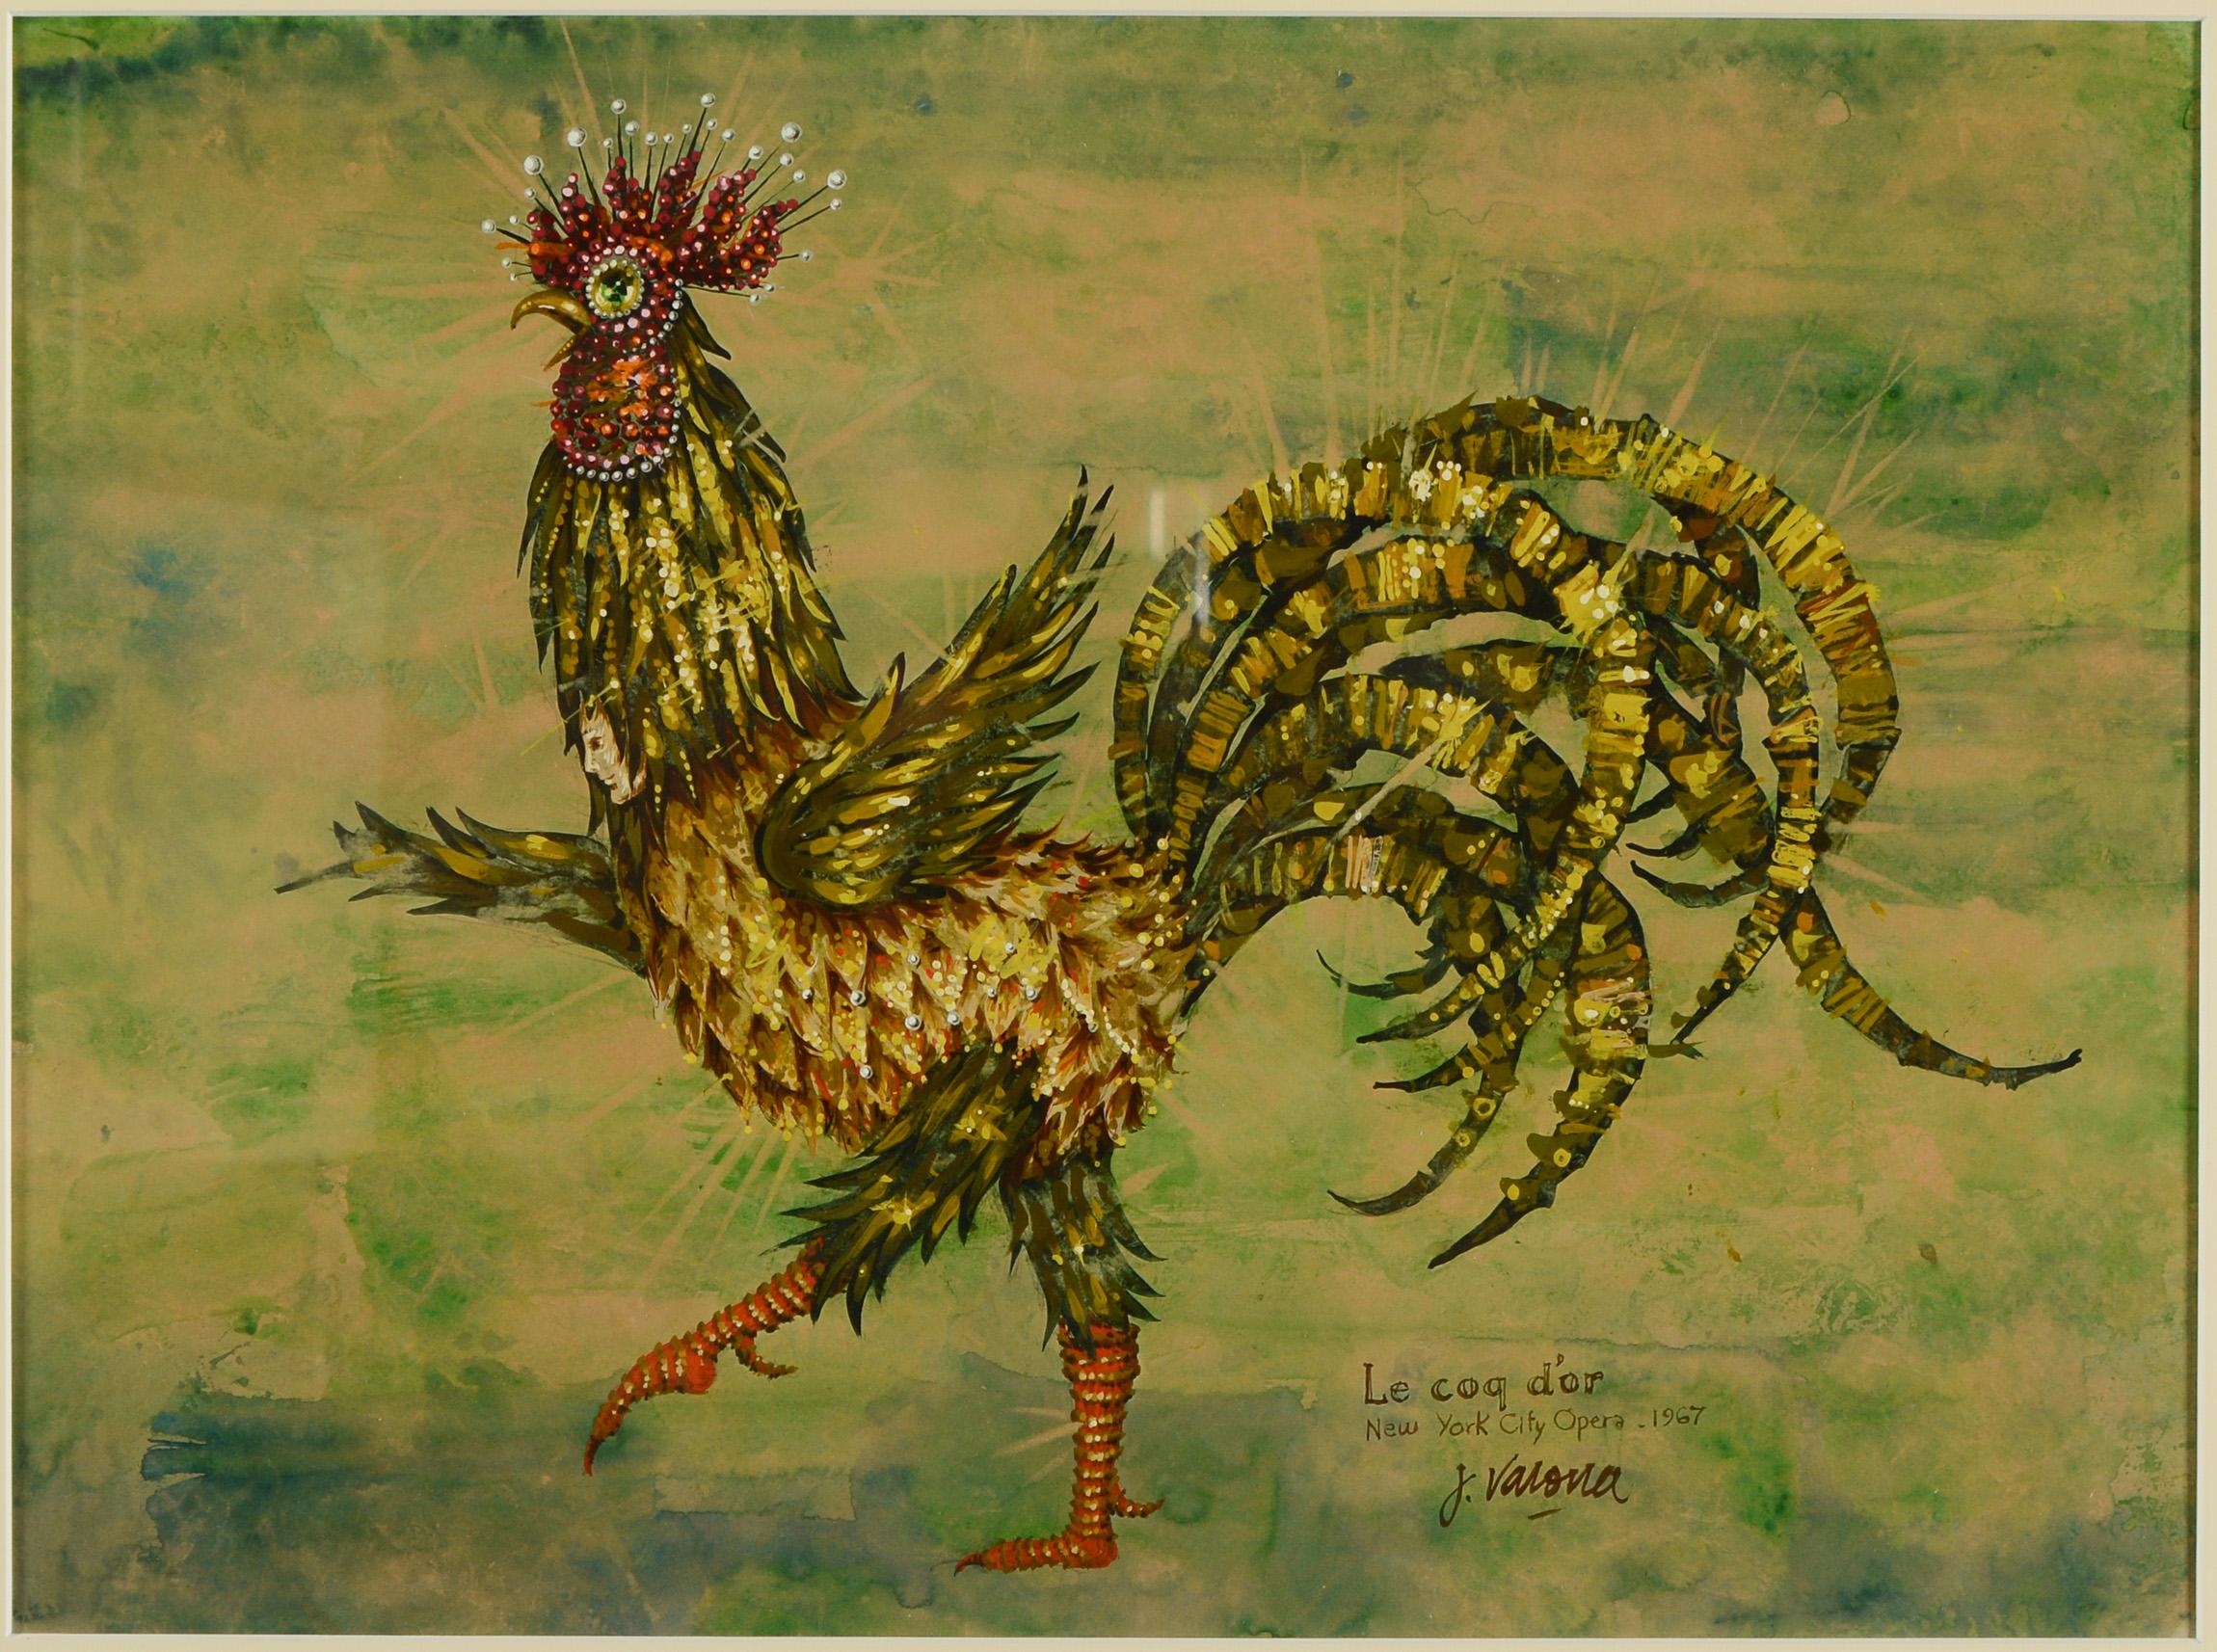 Final costume design drawing by Jose Varona for the New York City Opera's 1967 production of Le Coq d'Or (The Golden Cockerel). This design is for the title character. The drawing is ink, watercolor and gouache. Two other designs for this opera are